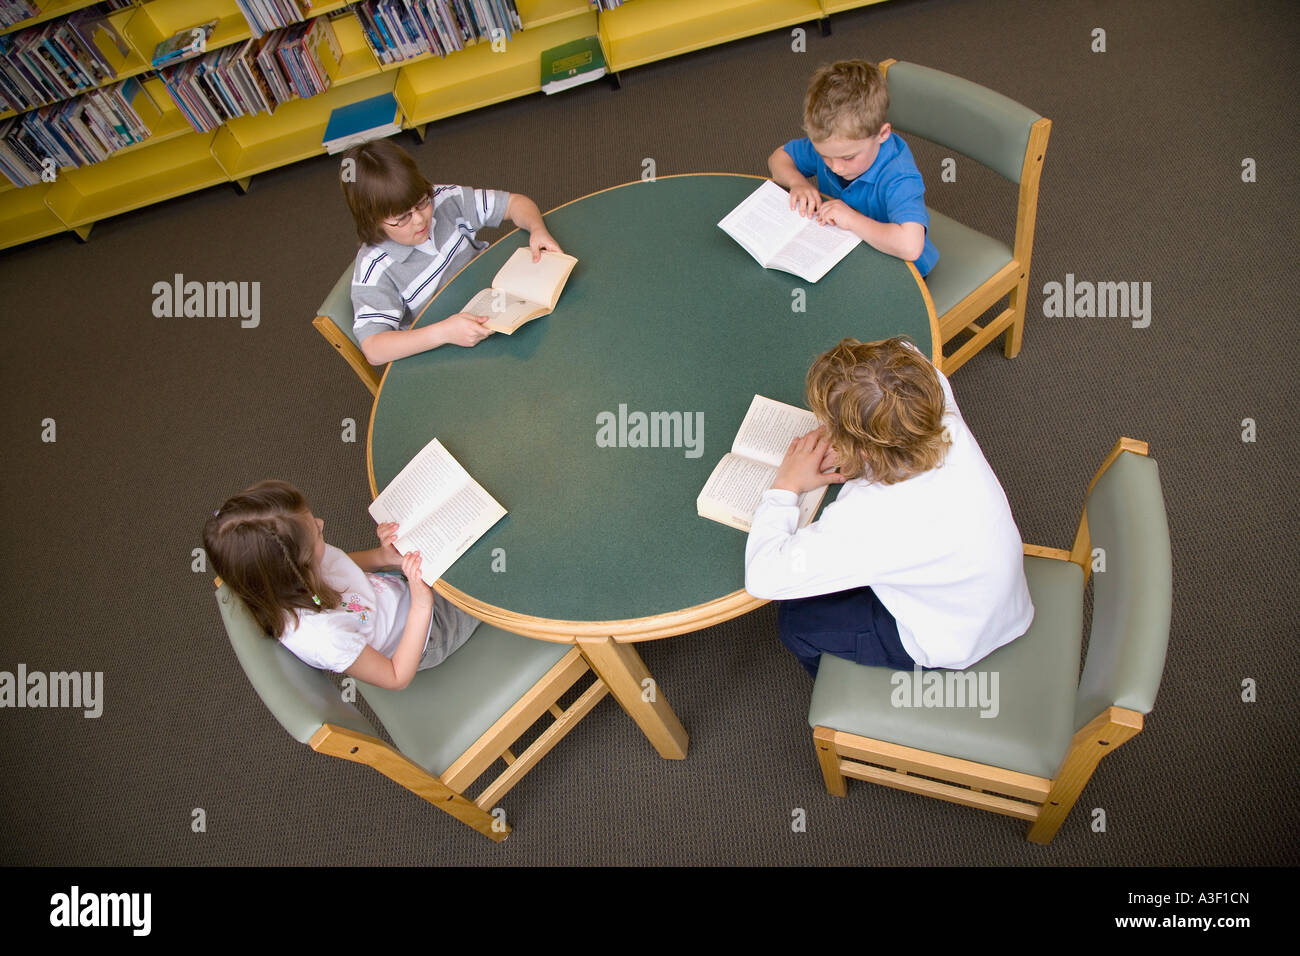 reading table for child